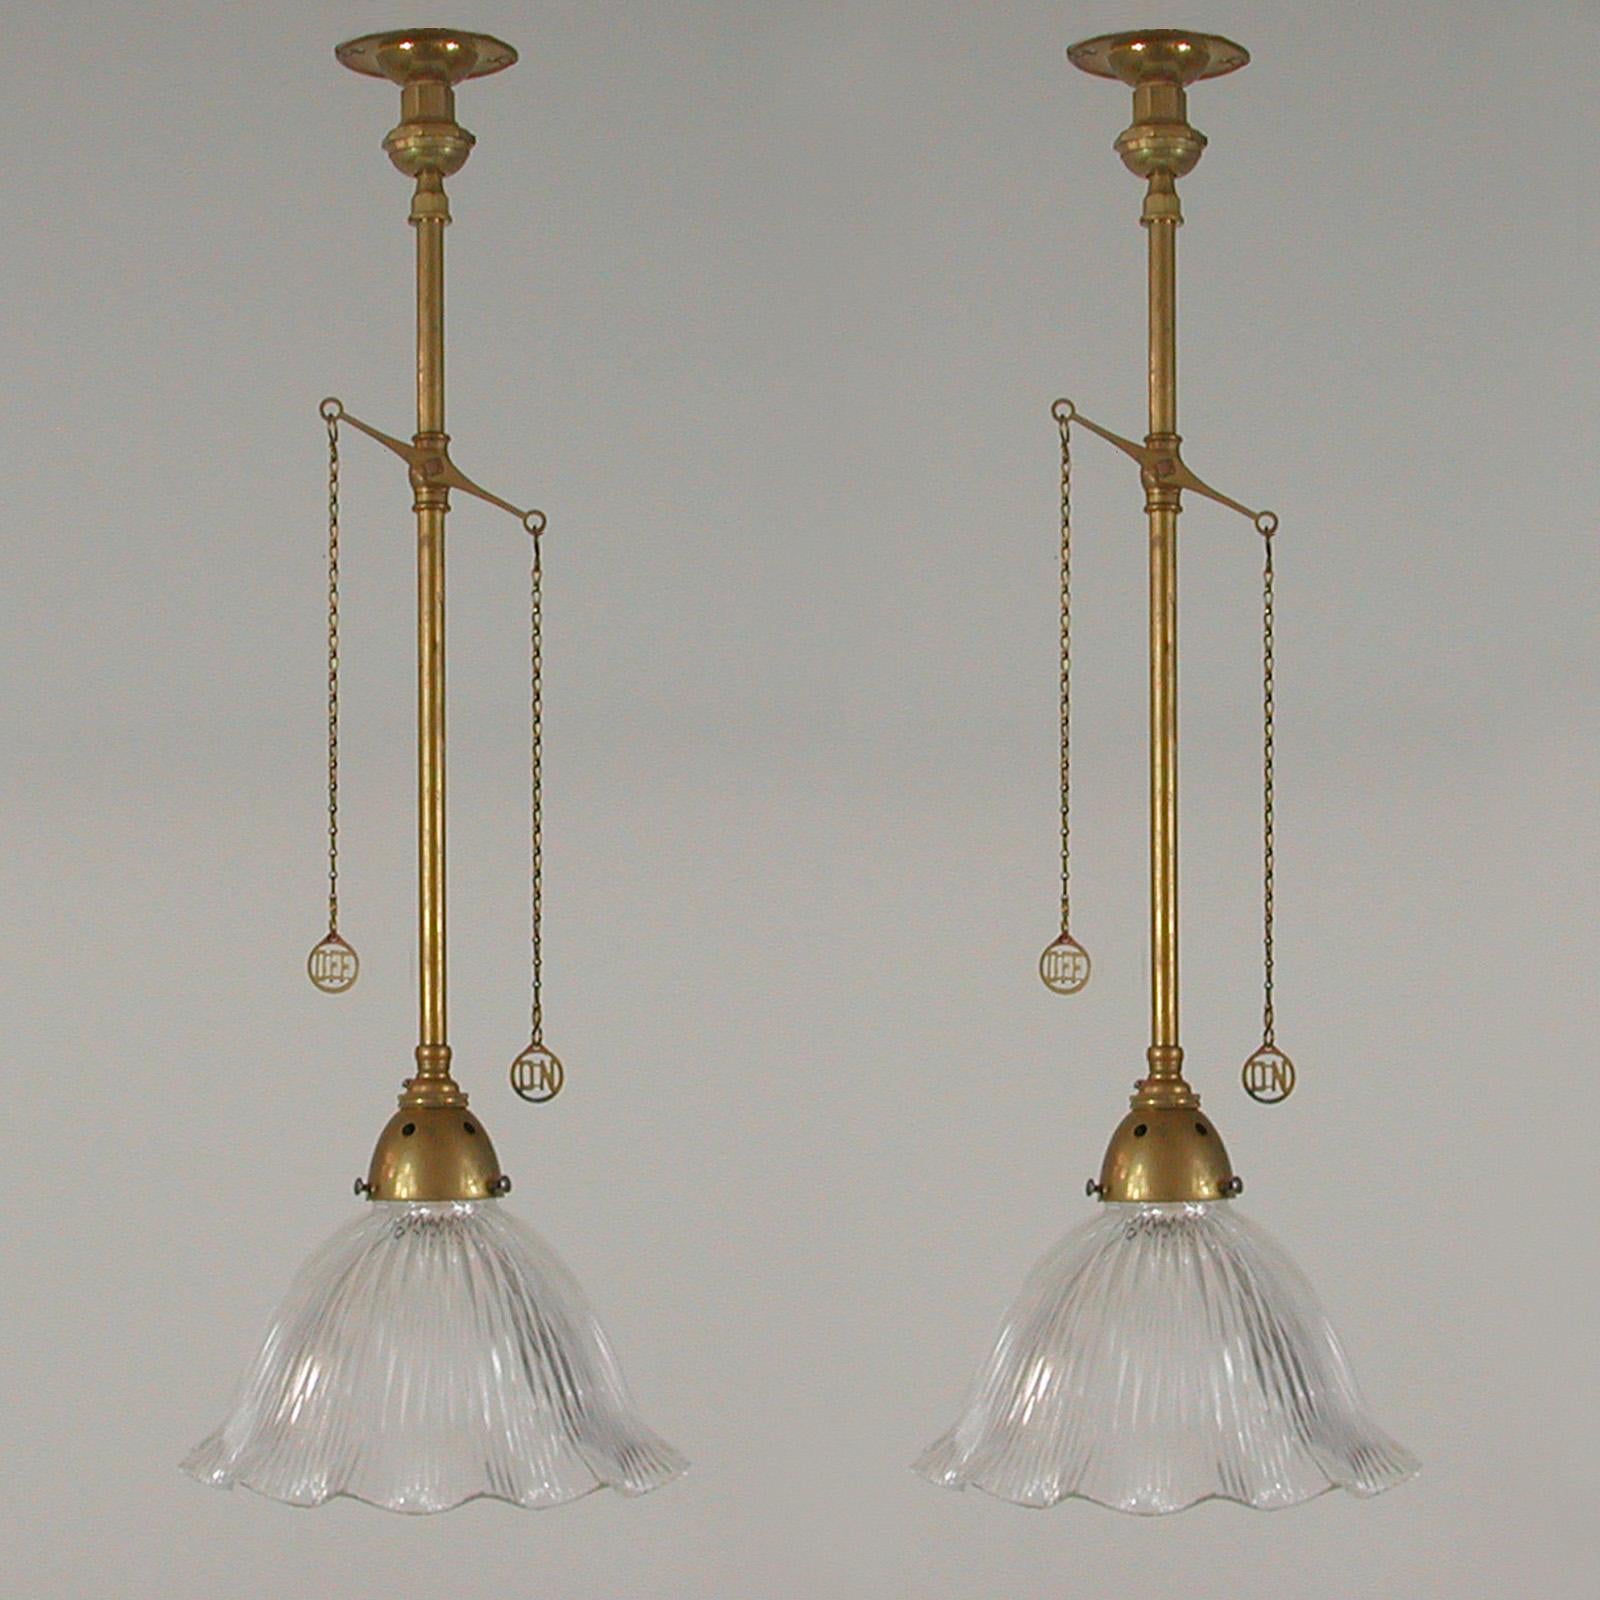 These unusual vintage pendants were designed and manufactured in England in the 1920s. They feature clear glass Holophane style tulip shaped lamp shades and naturally aged brass details. The lights appear to have been converted from old gas lamps in